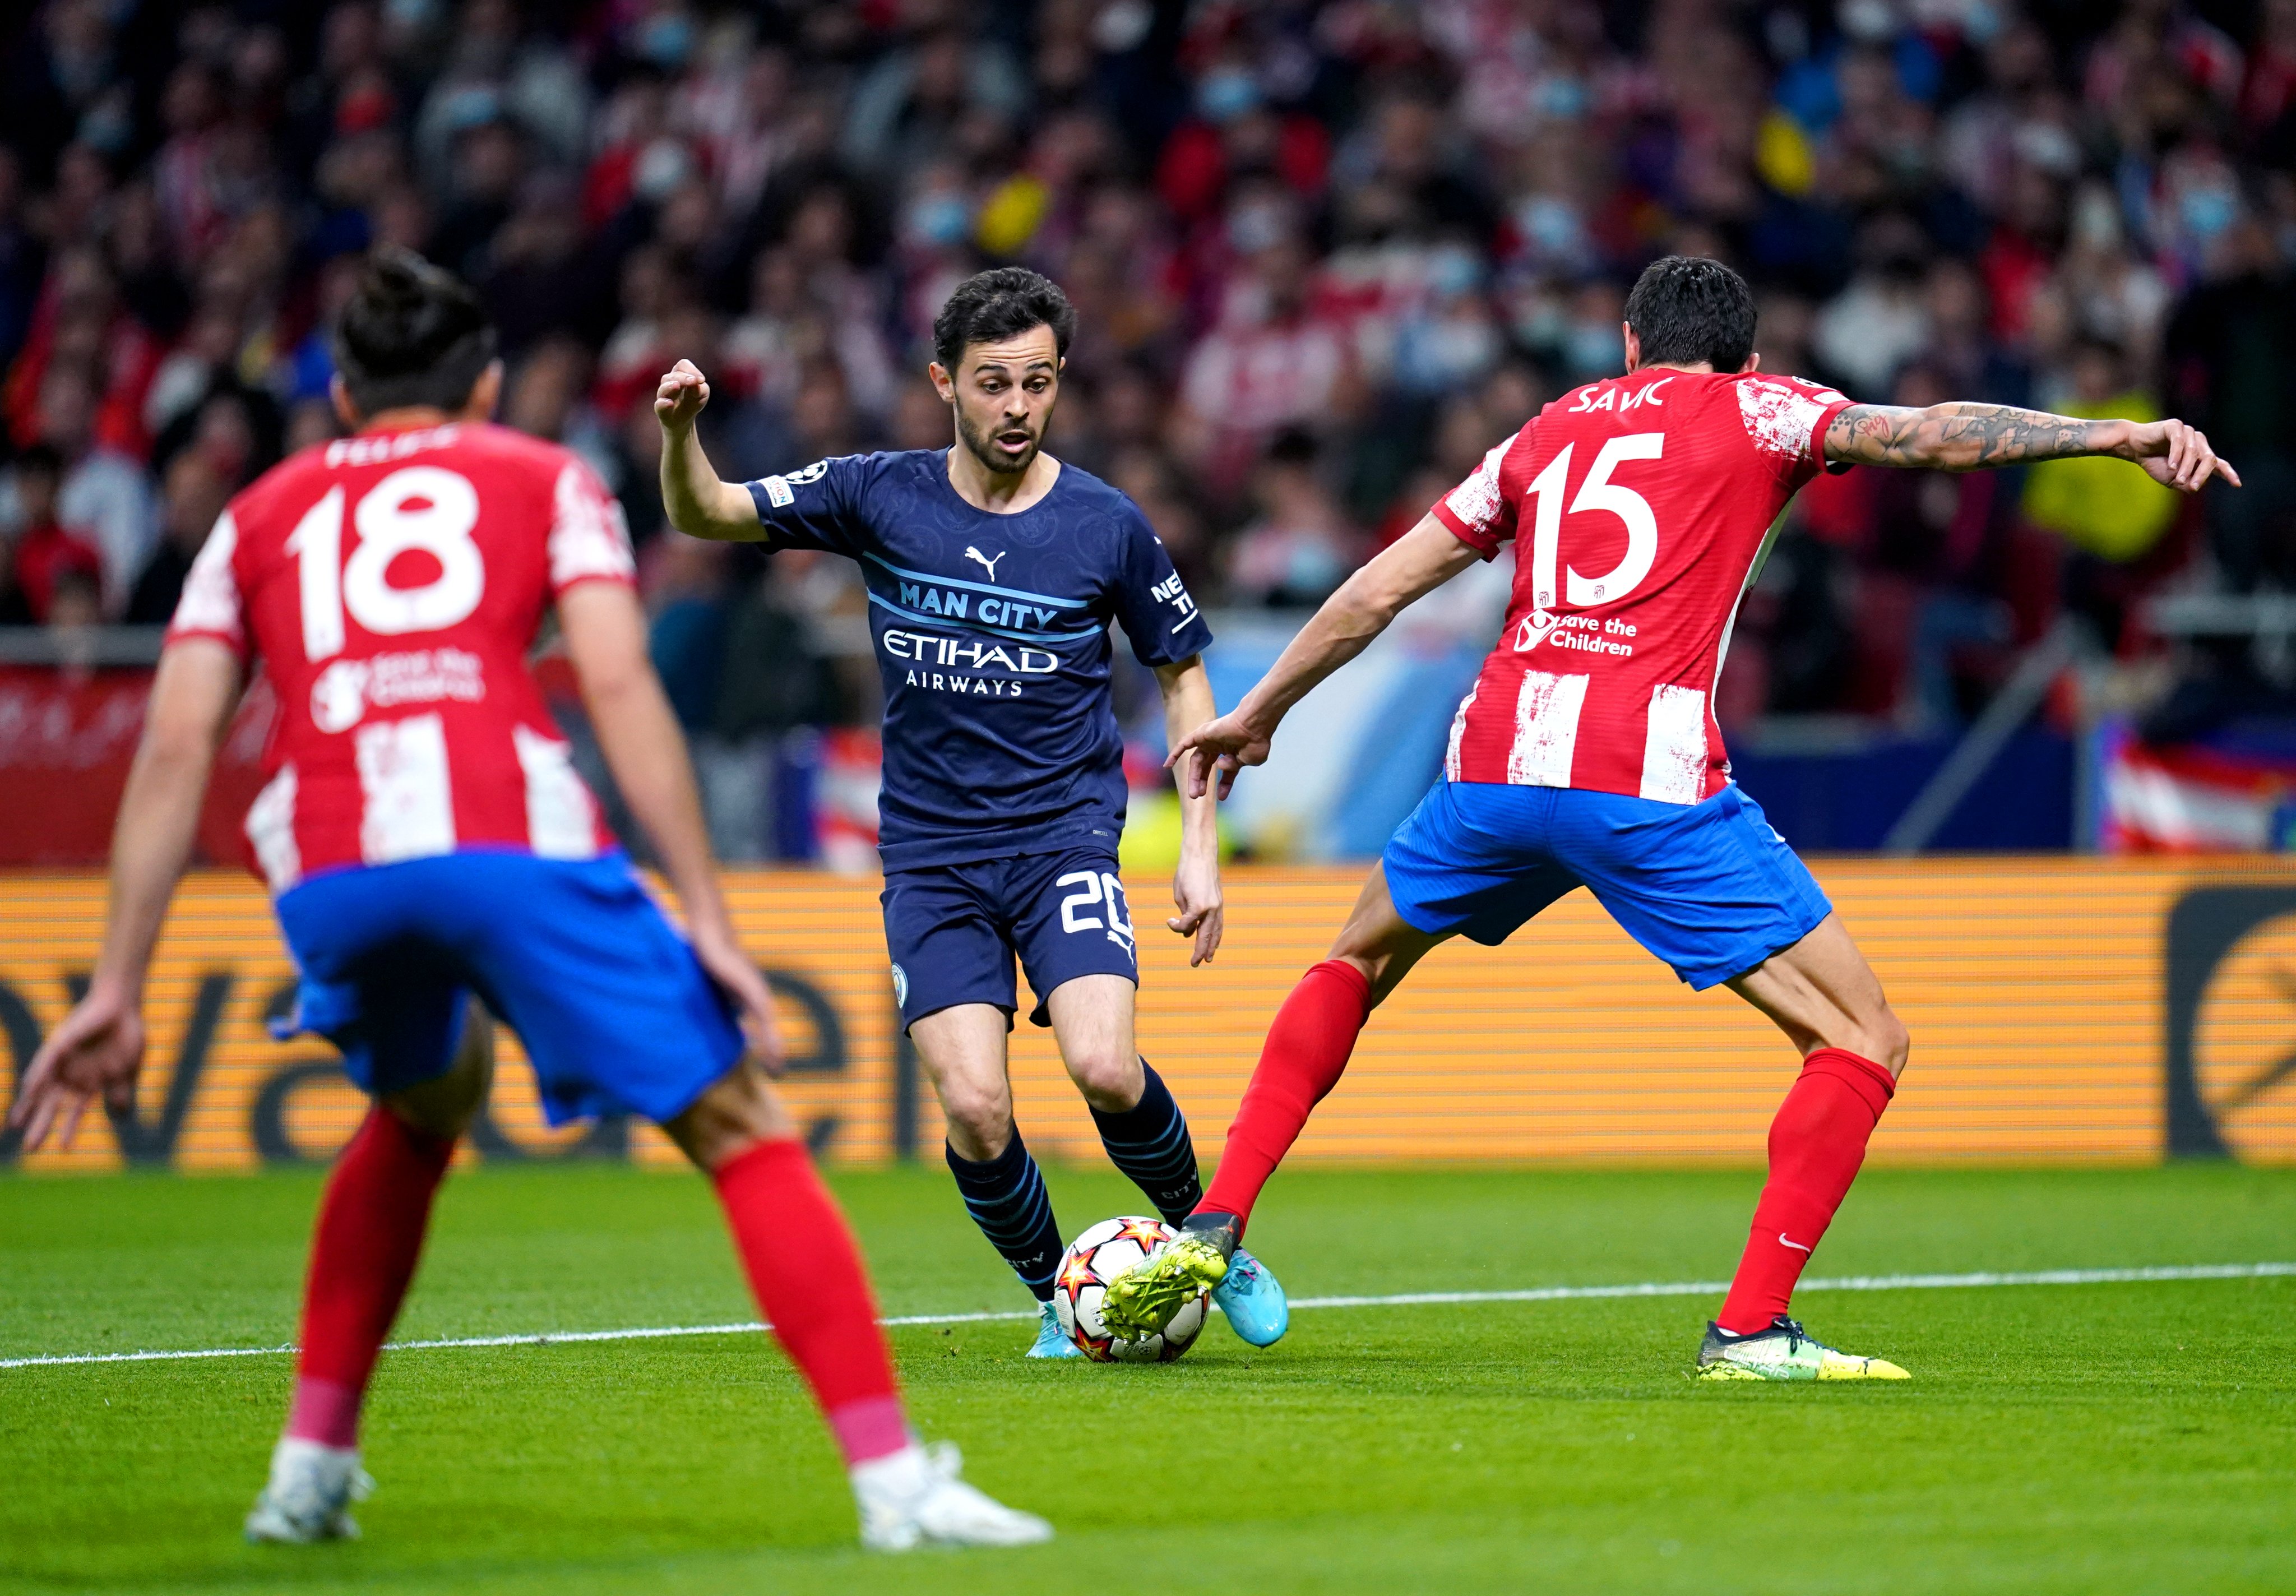 UEFA Champions League Quarterfinal: Man City set up semi-final meet with Real Madrid, 10-men Atletico Madrid DUMPED OUT by Manchester City in a violent goalless draw